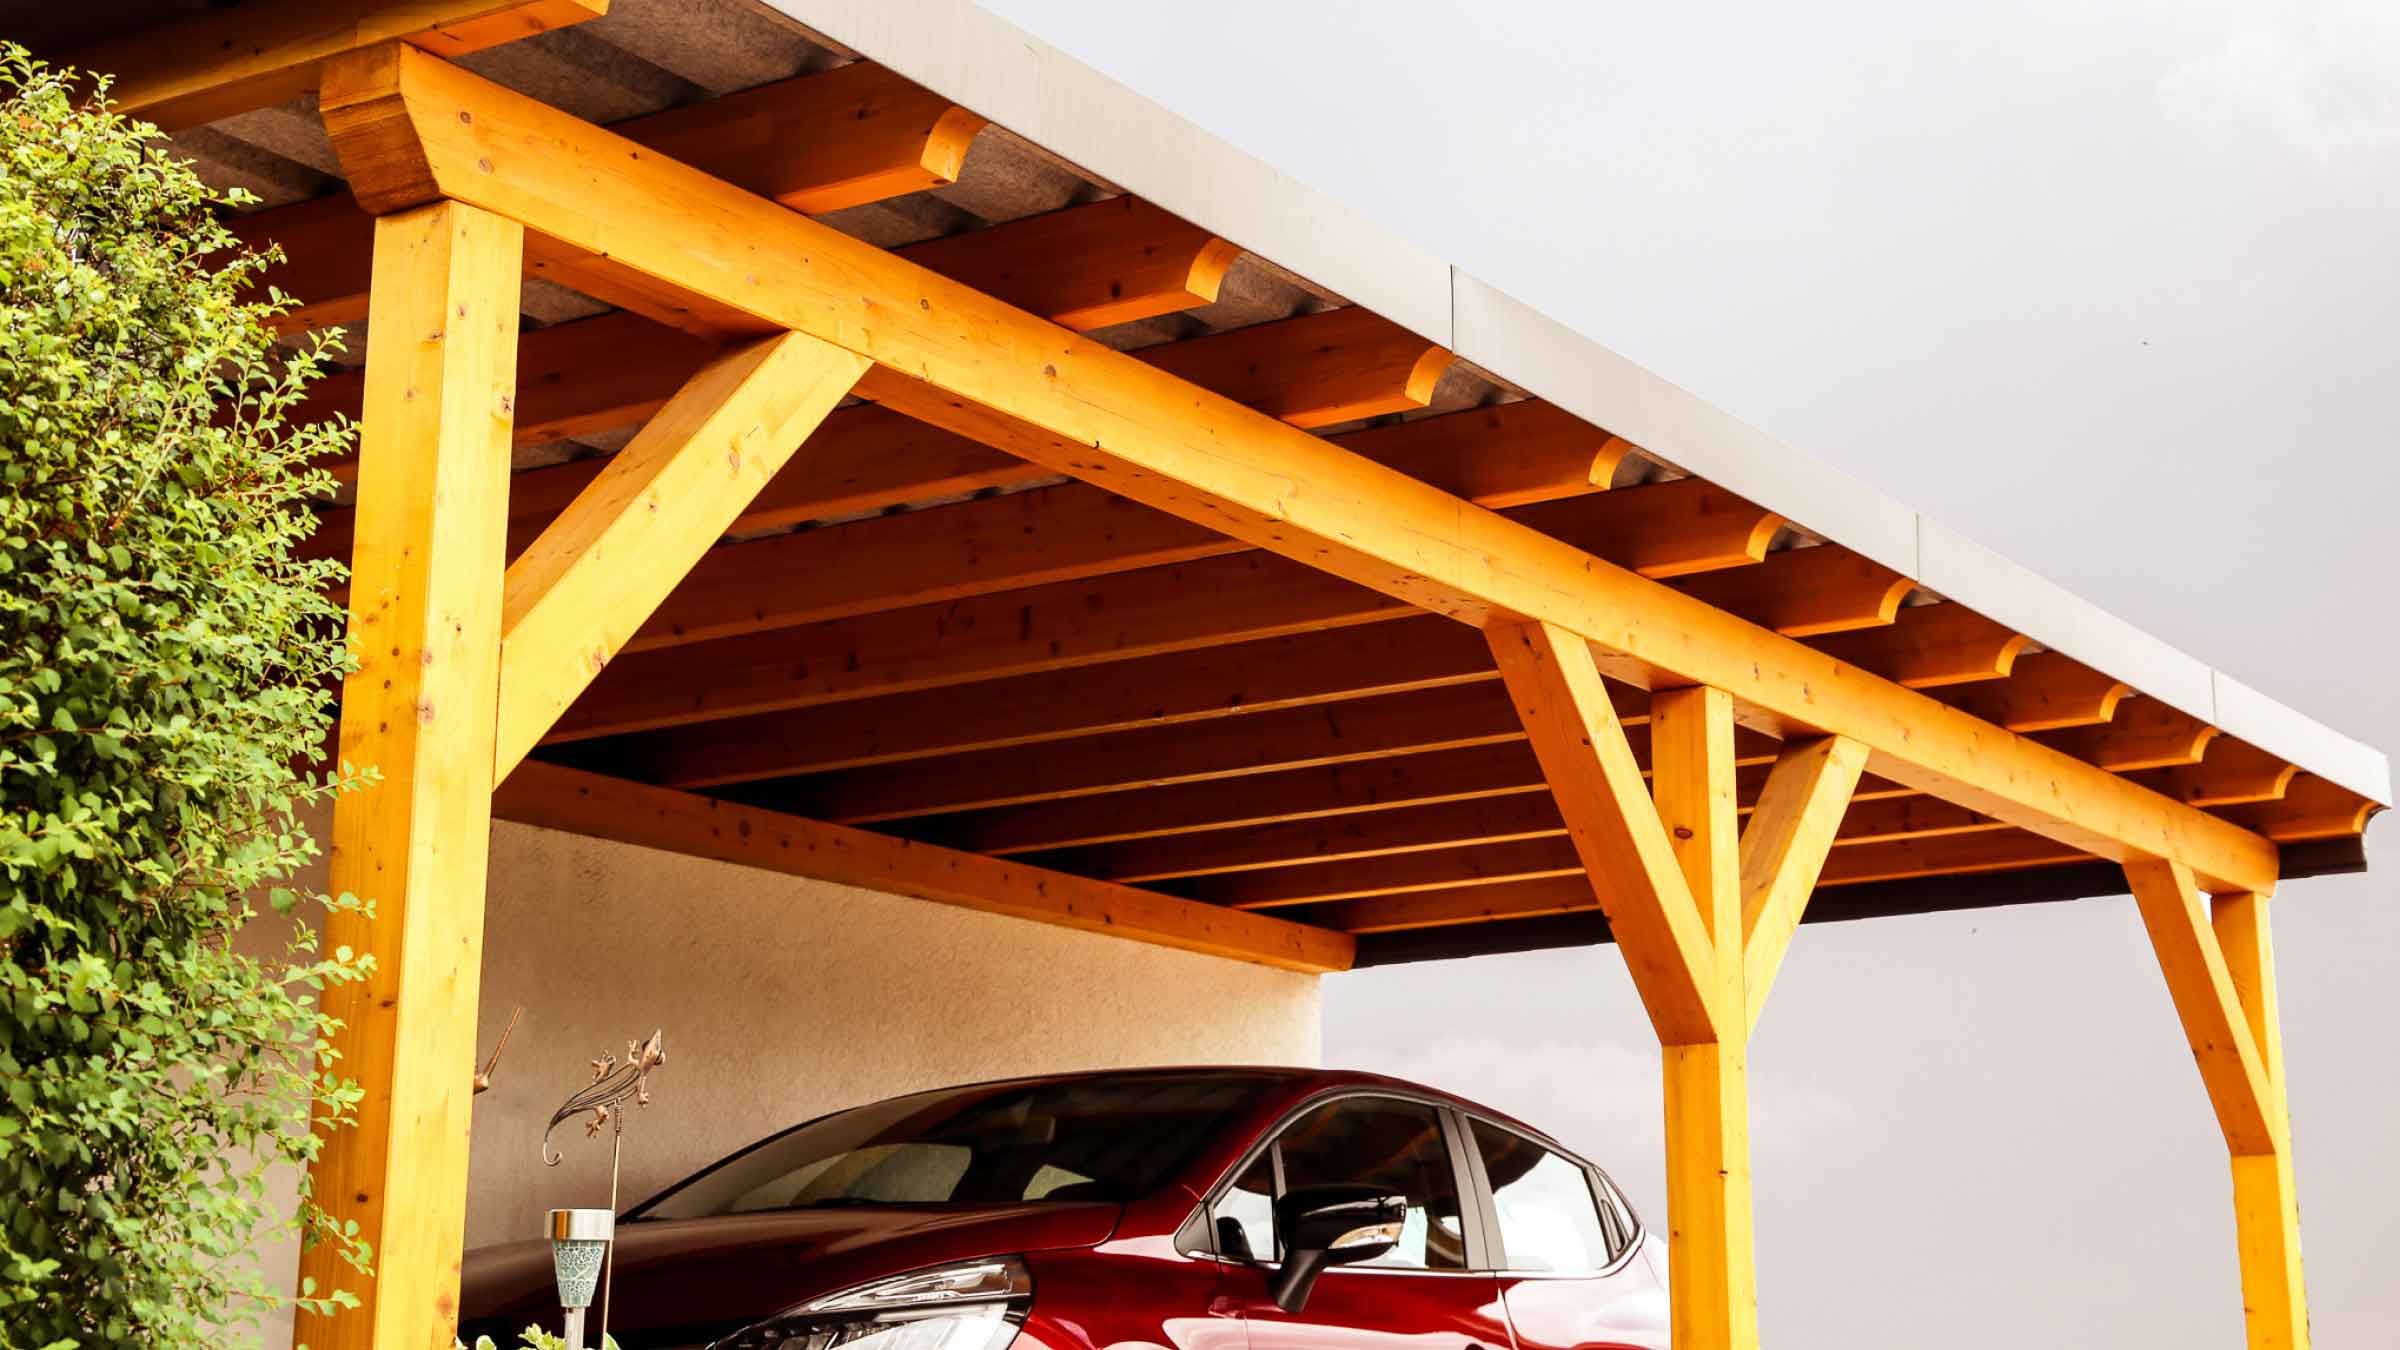 Sturdy wooden framed carport with corrugated rooftop and a red car parked beneath it.